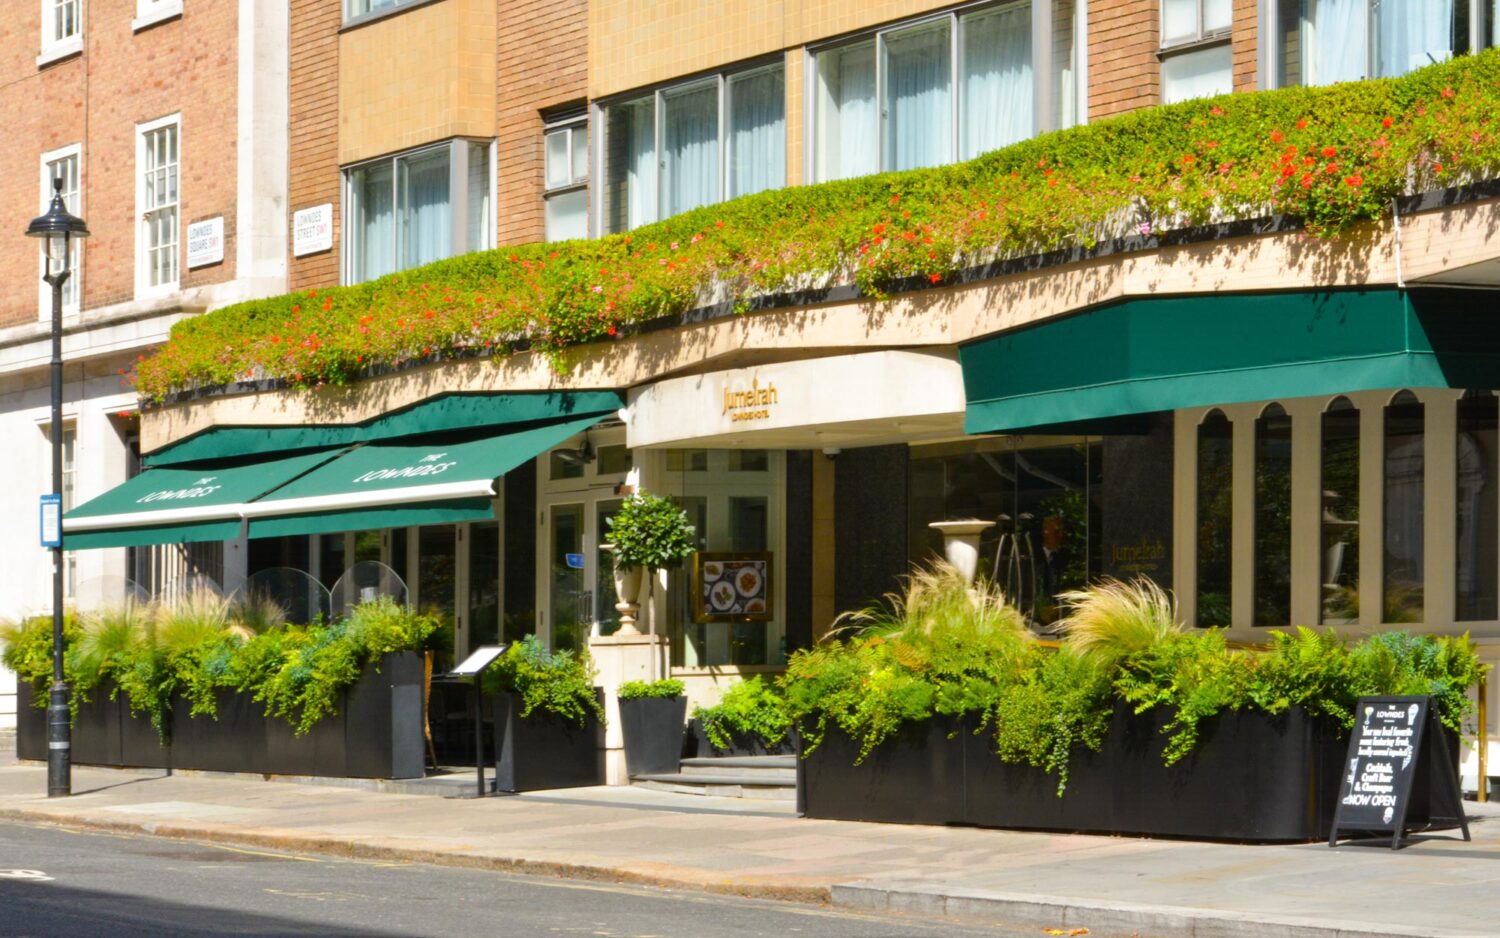 Jumeirah Lowndes Hotel Patio Awnings London